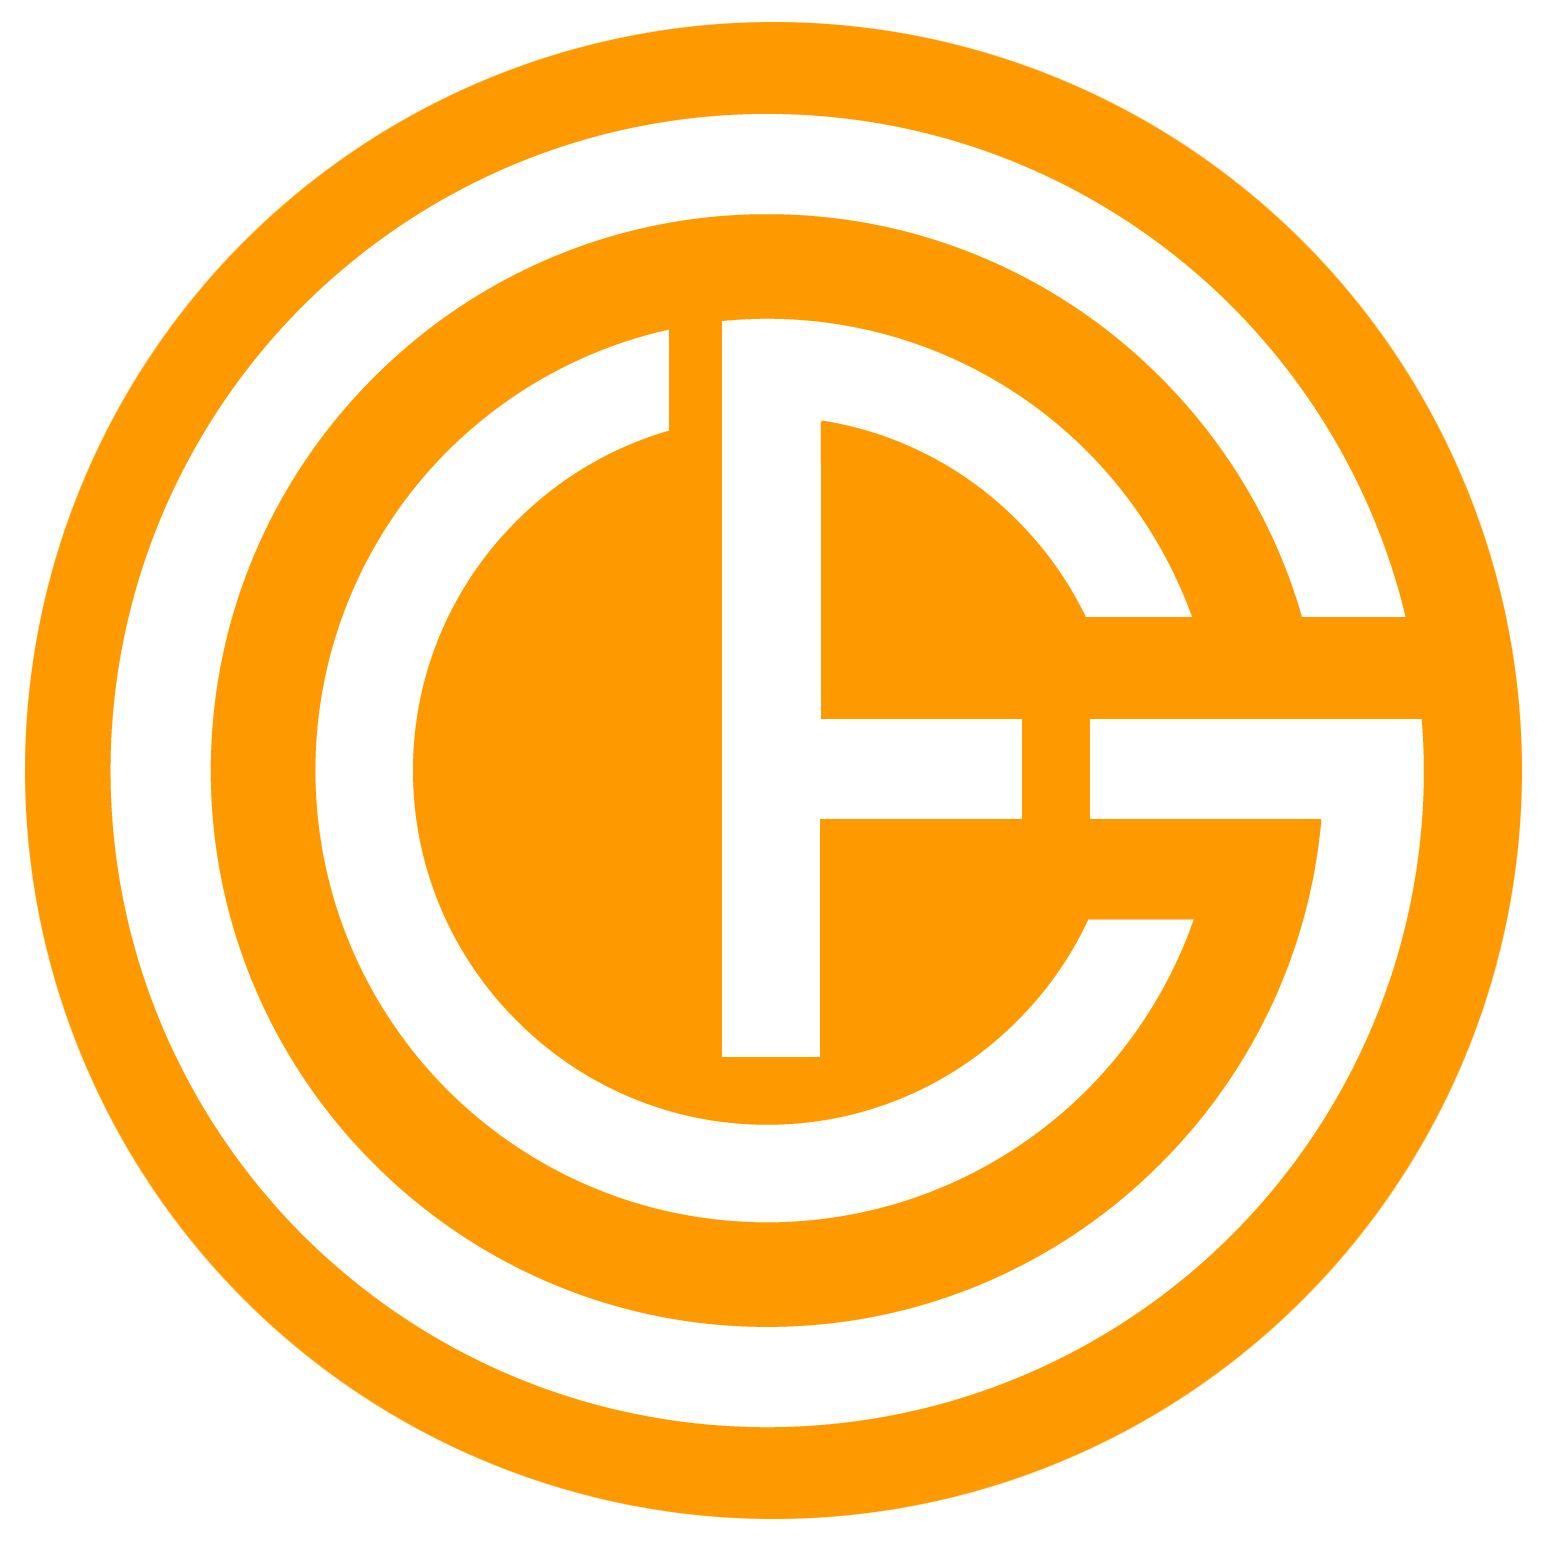 GFC Logo - Global Focus on Cancer: Donate to our organisation (betterplace.org)